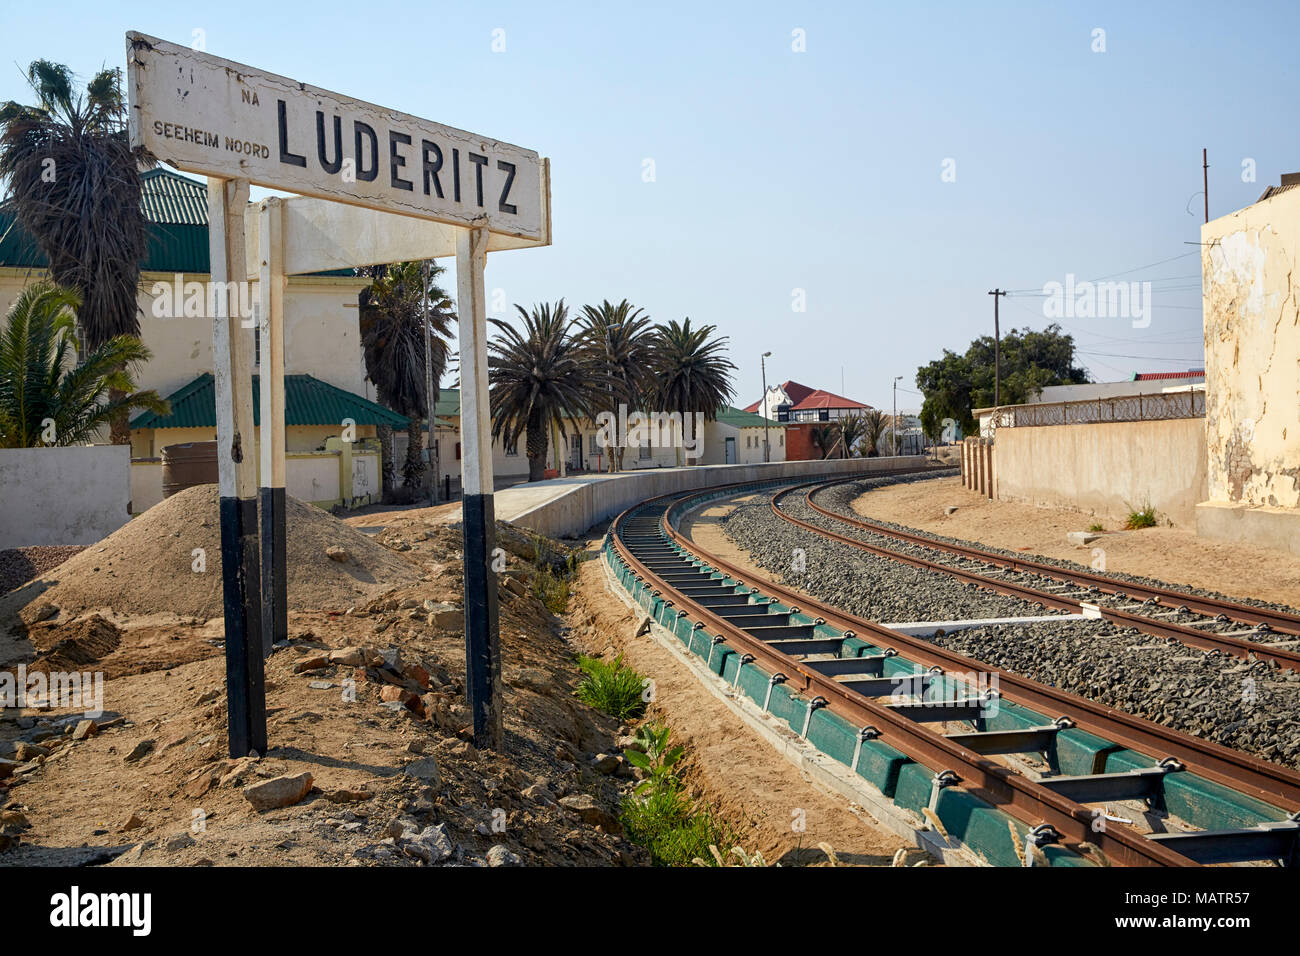 Luderitz sign at Luderitz train station in Luderitz, Namibia, Africa Stock Photo